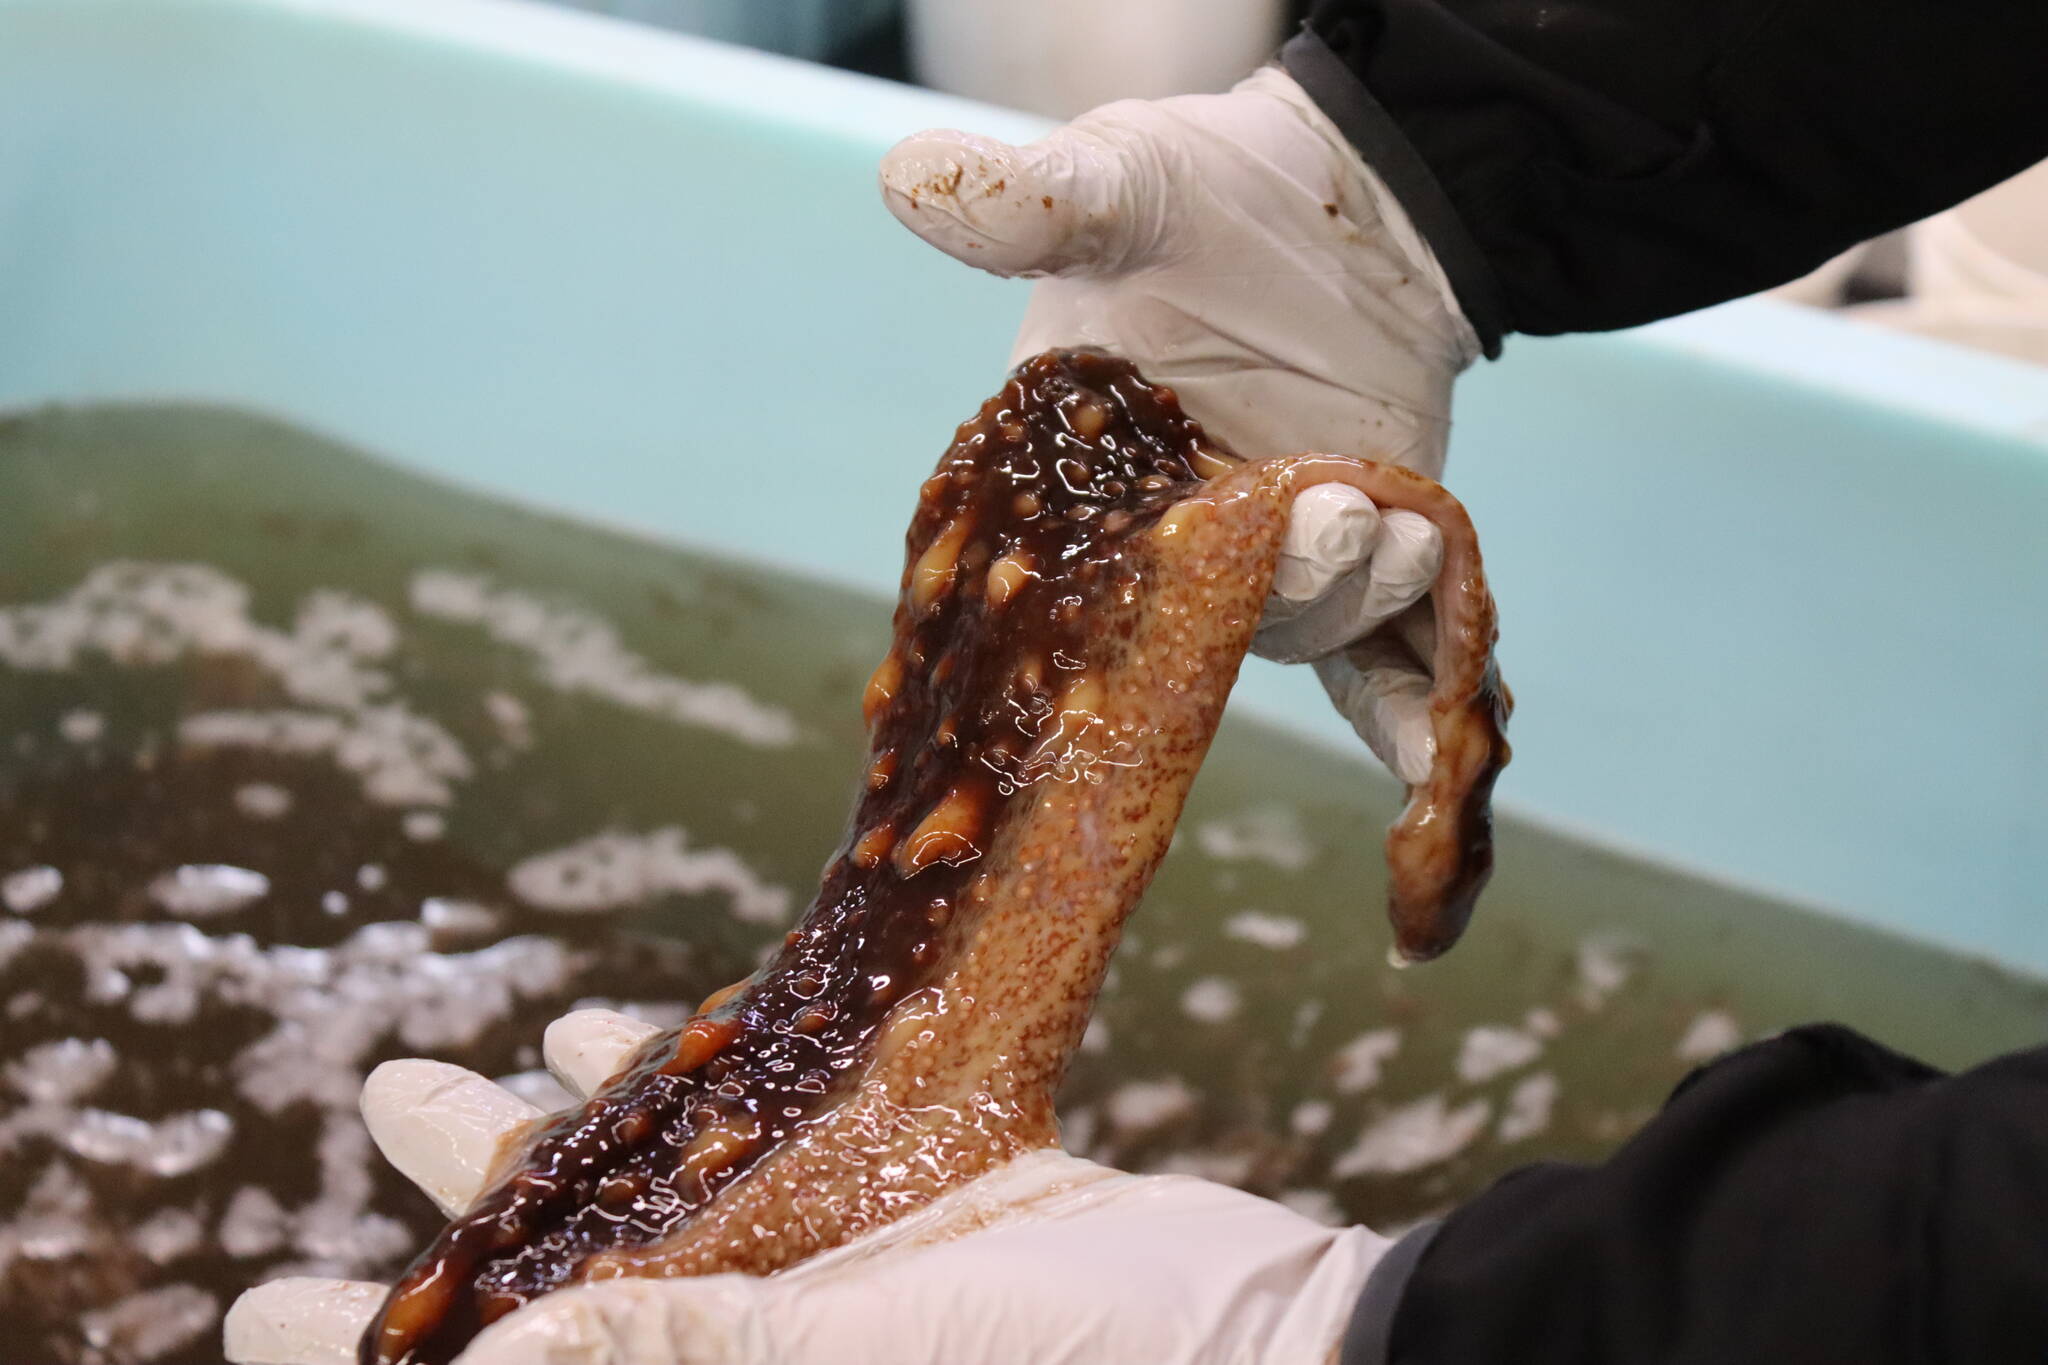 Meredith Jordan/ Juneau Empire
A manager at Alaska Glacier Seafood shows a filleted sea cucumber ready for further processing.